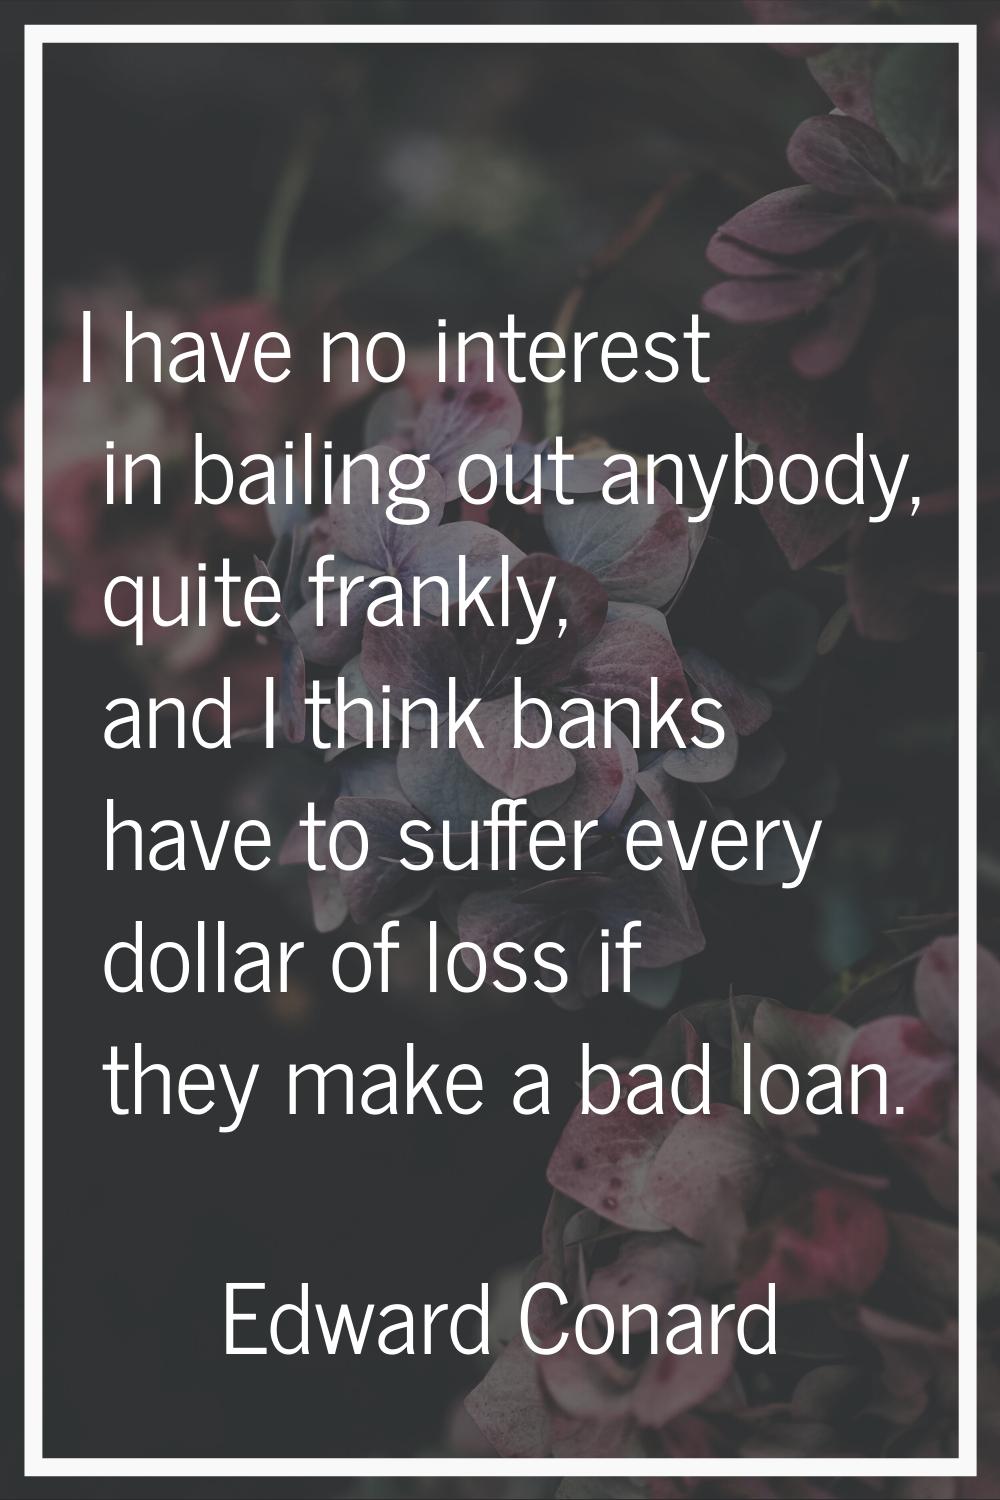 I have no interest in bailing out anybody, quite frankly, and I think banks have to suffer every do